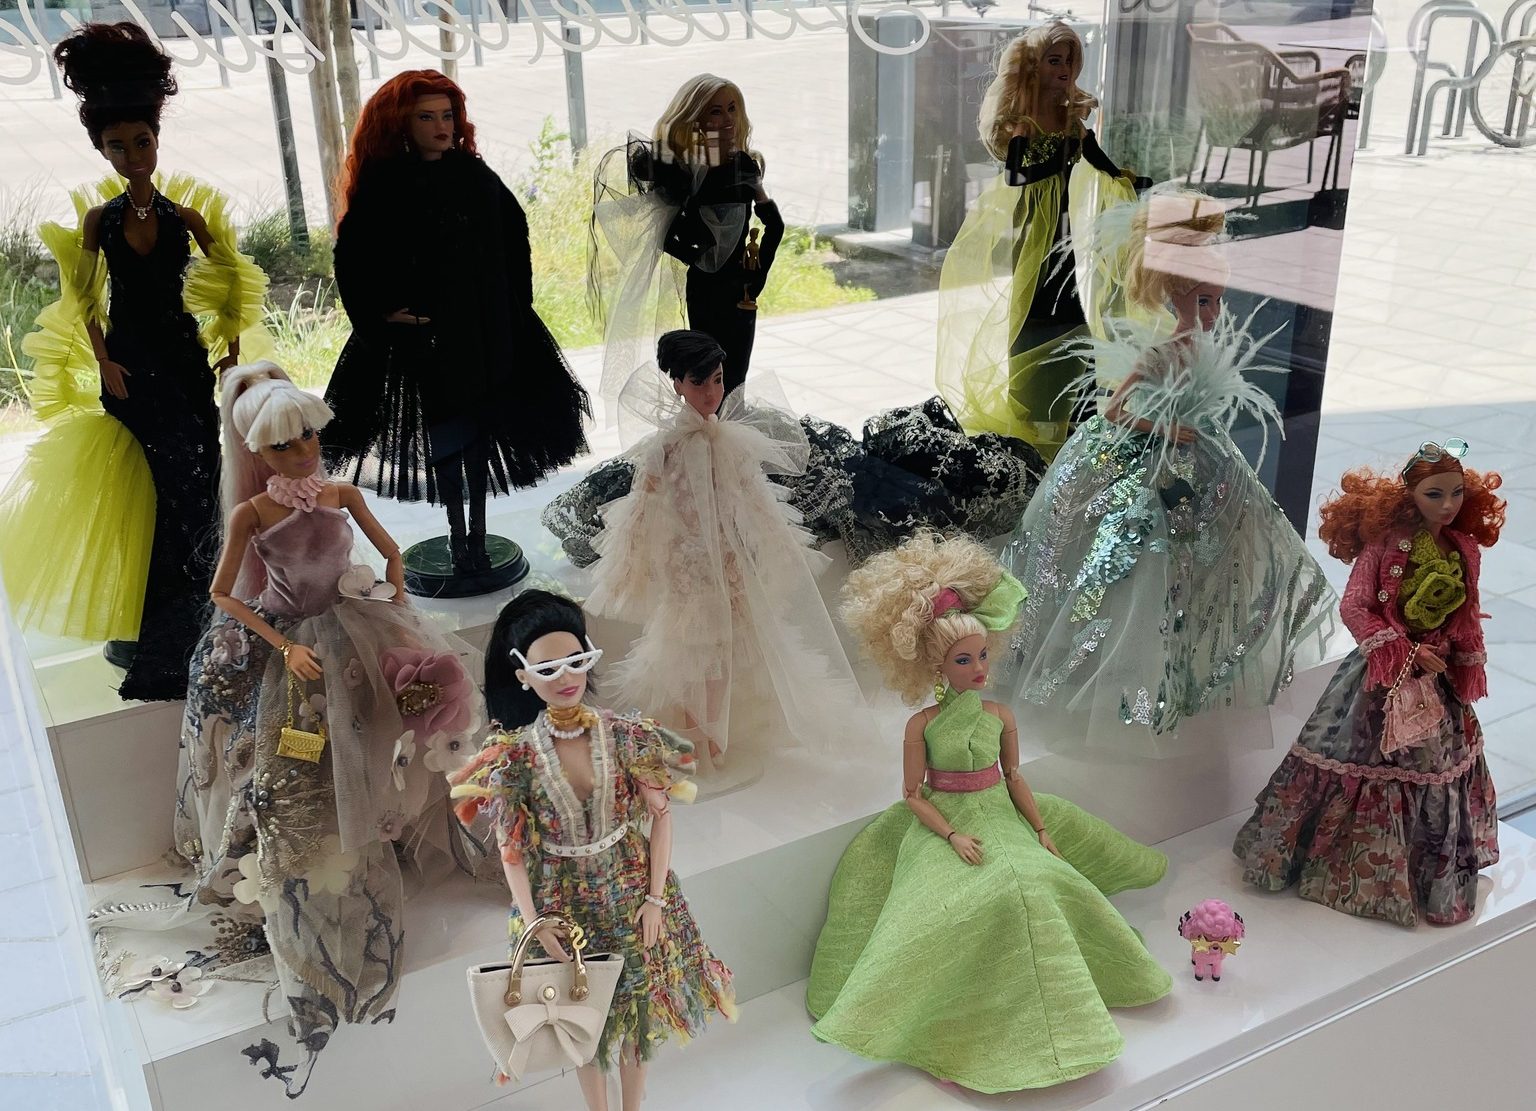 Barbie Dolls Dressed by Hungarian Luxury Brand Exhibited at New Location [Video]